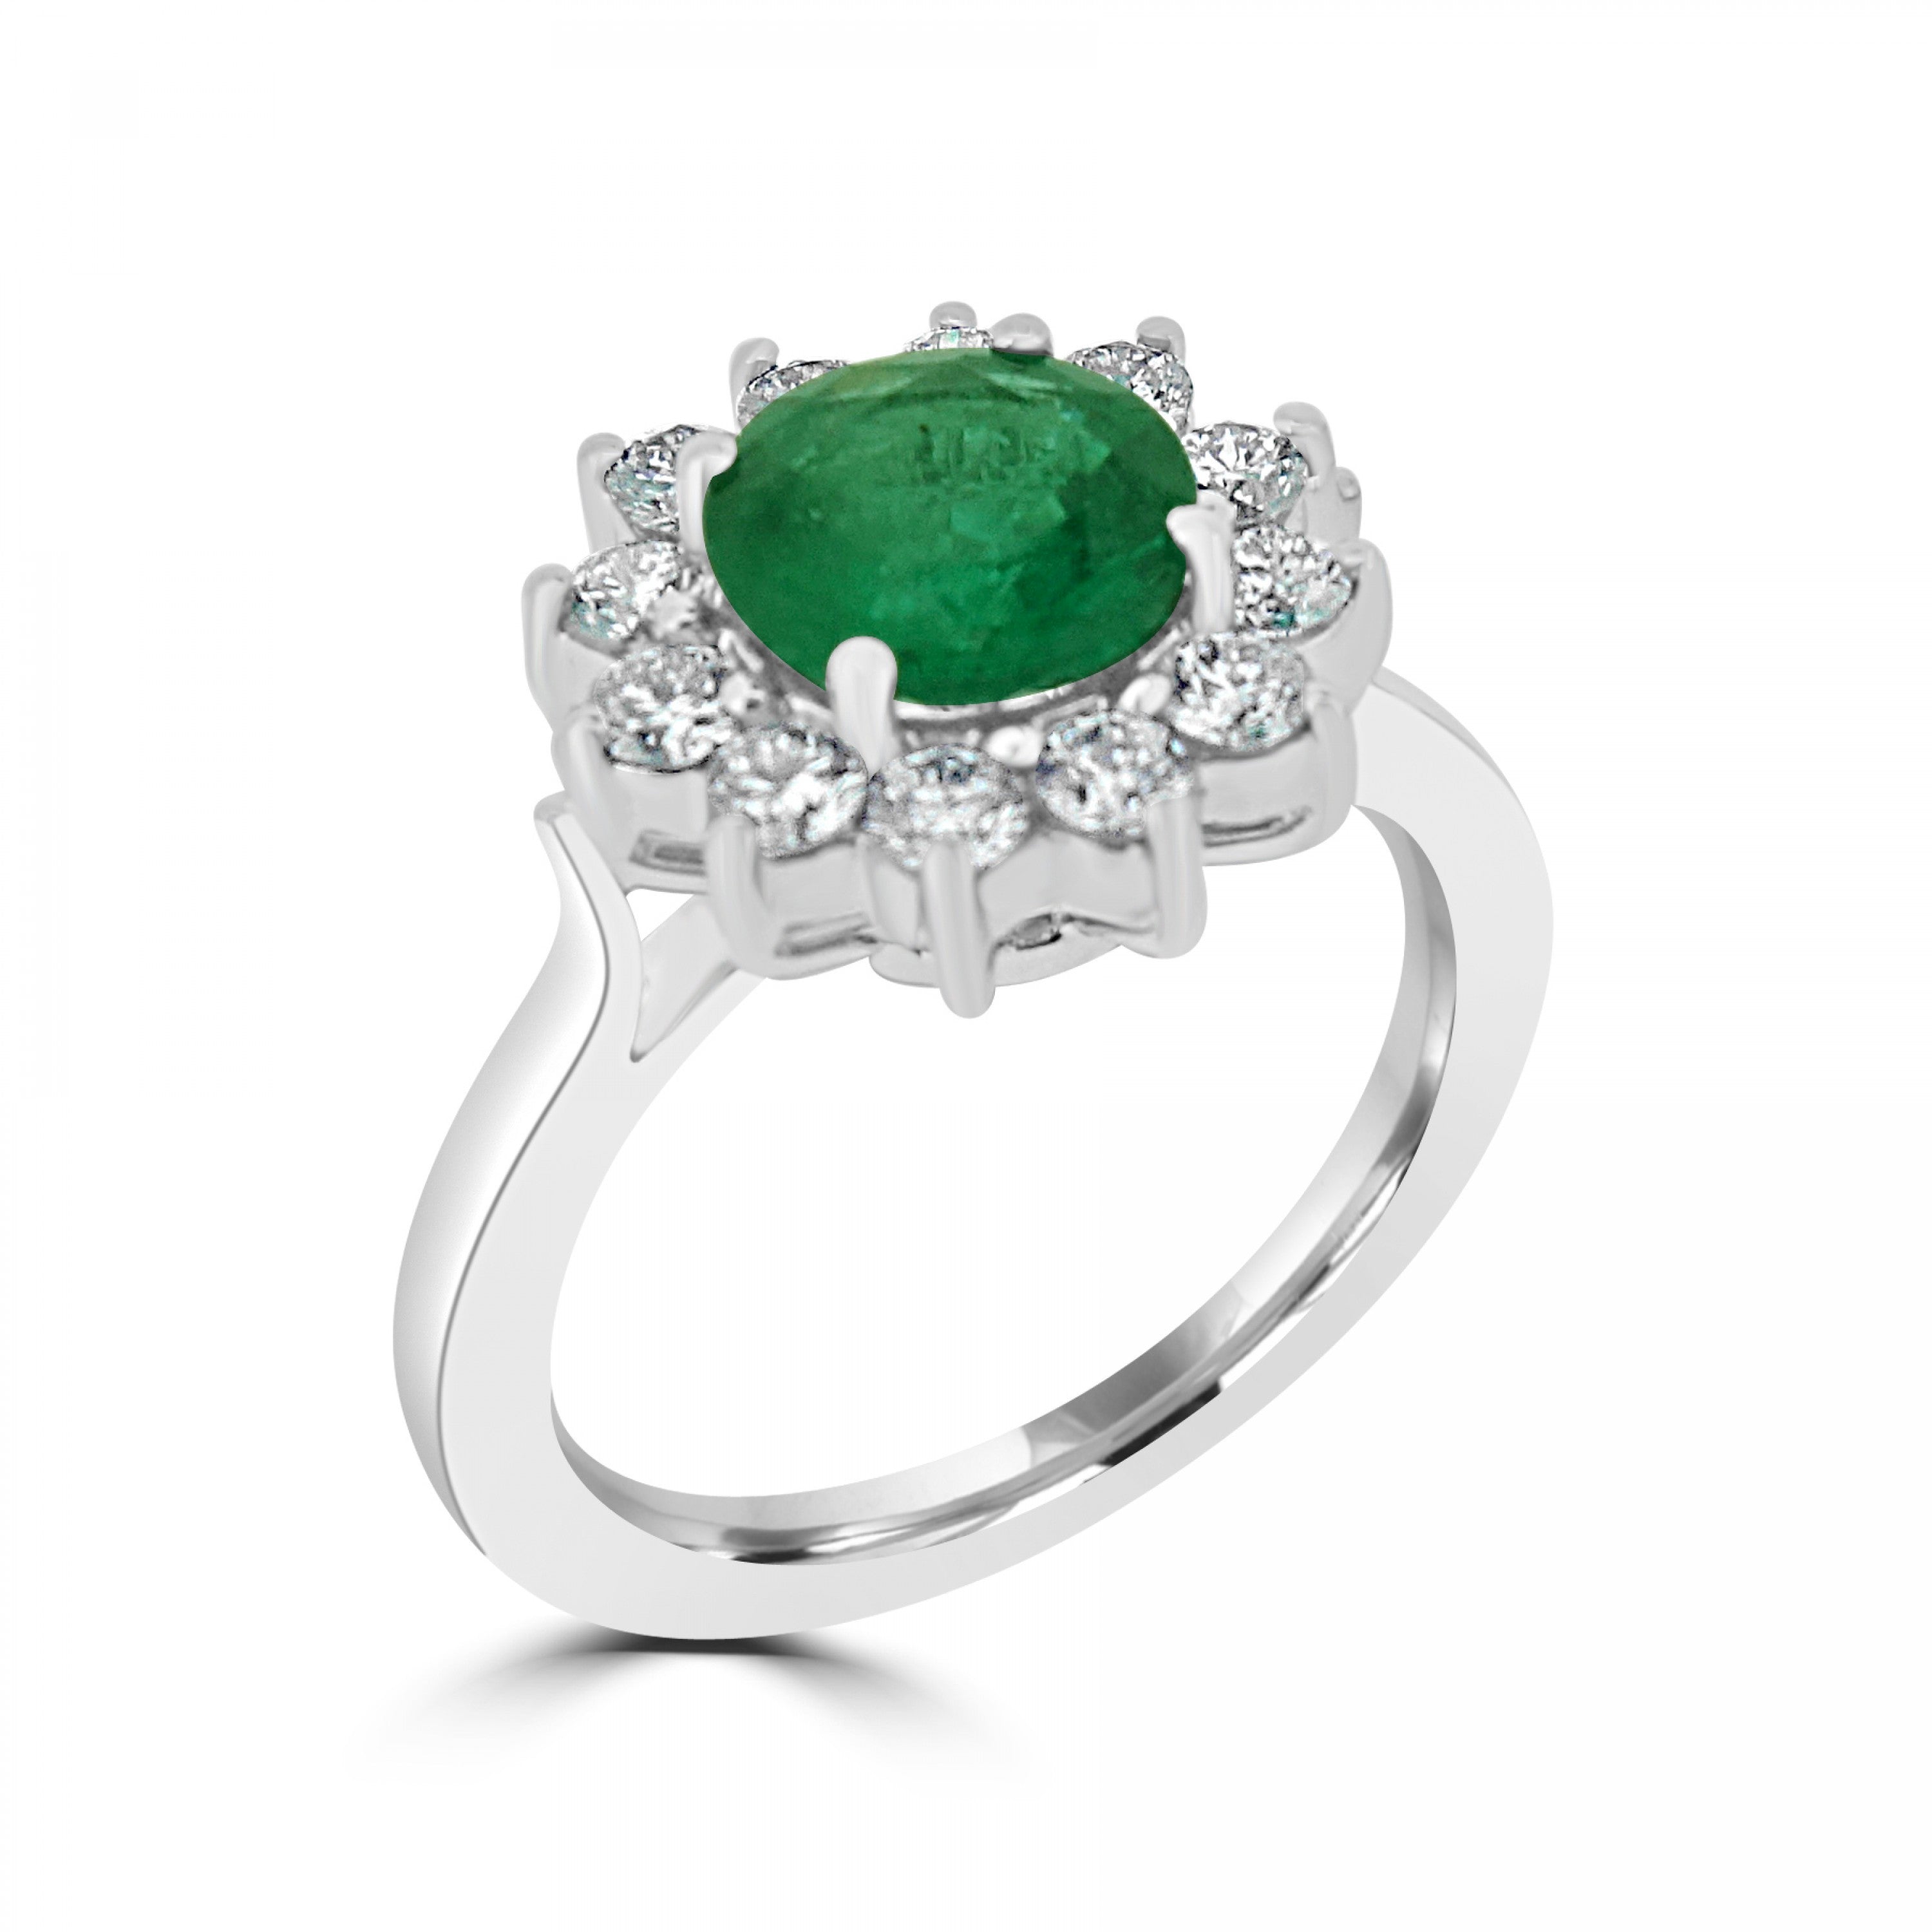 ROUND EMERALD AND DIAMOND CLUSTER ENGAGEMENT  RING